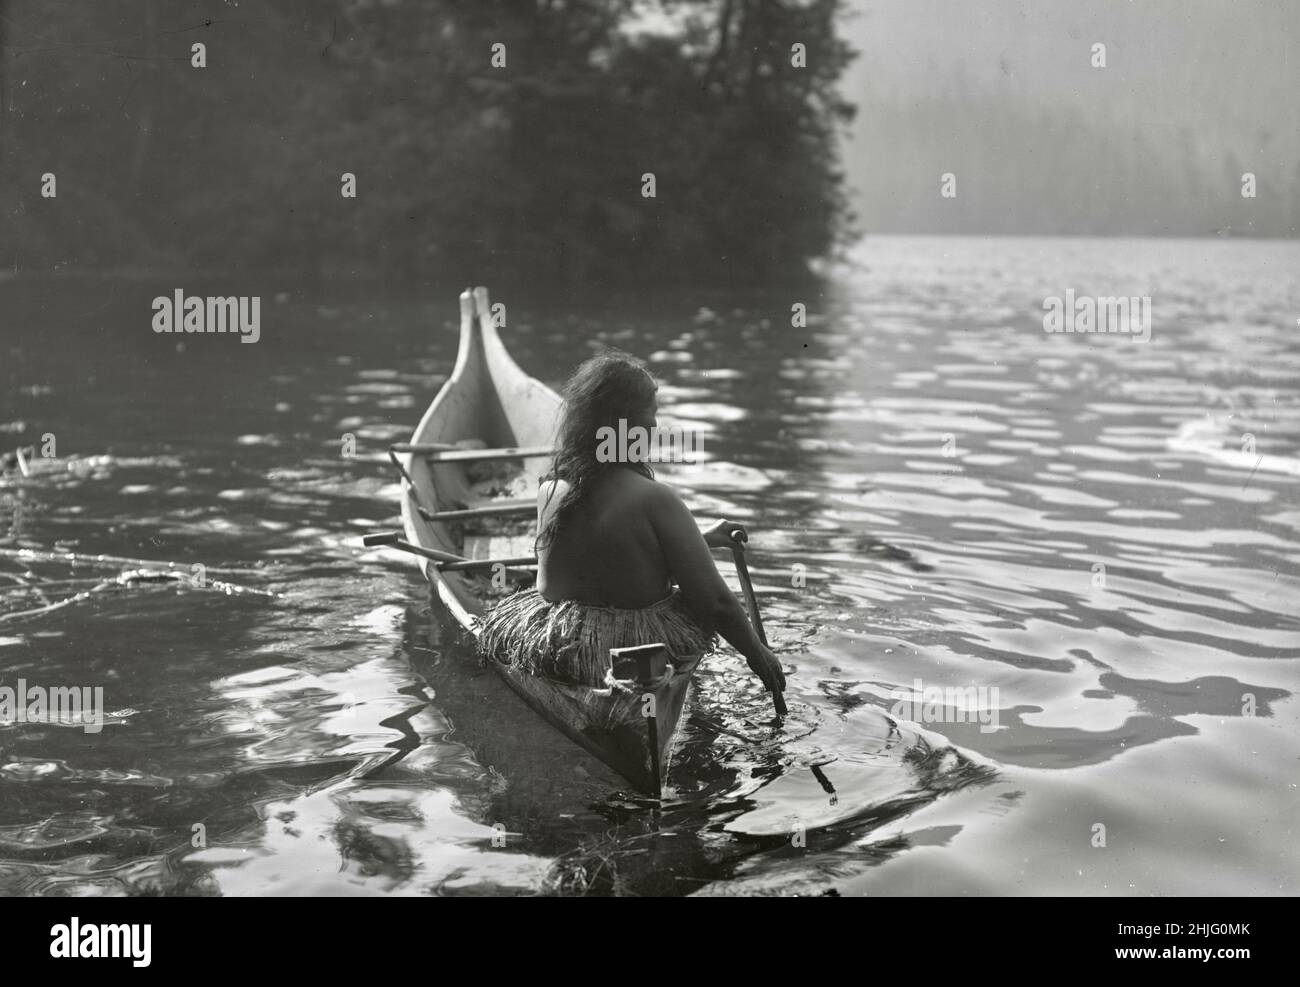 Edward S Curtis photograph - Clayoquot Indian paddling canoe into area shaded by trees - 1910 Stock Photo